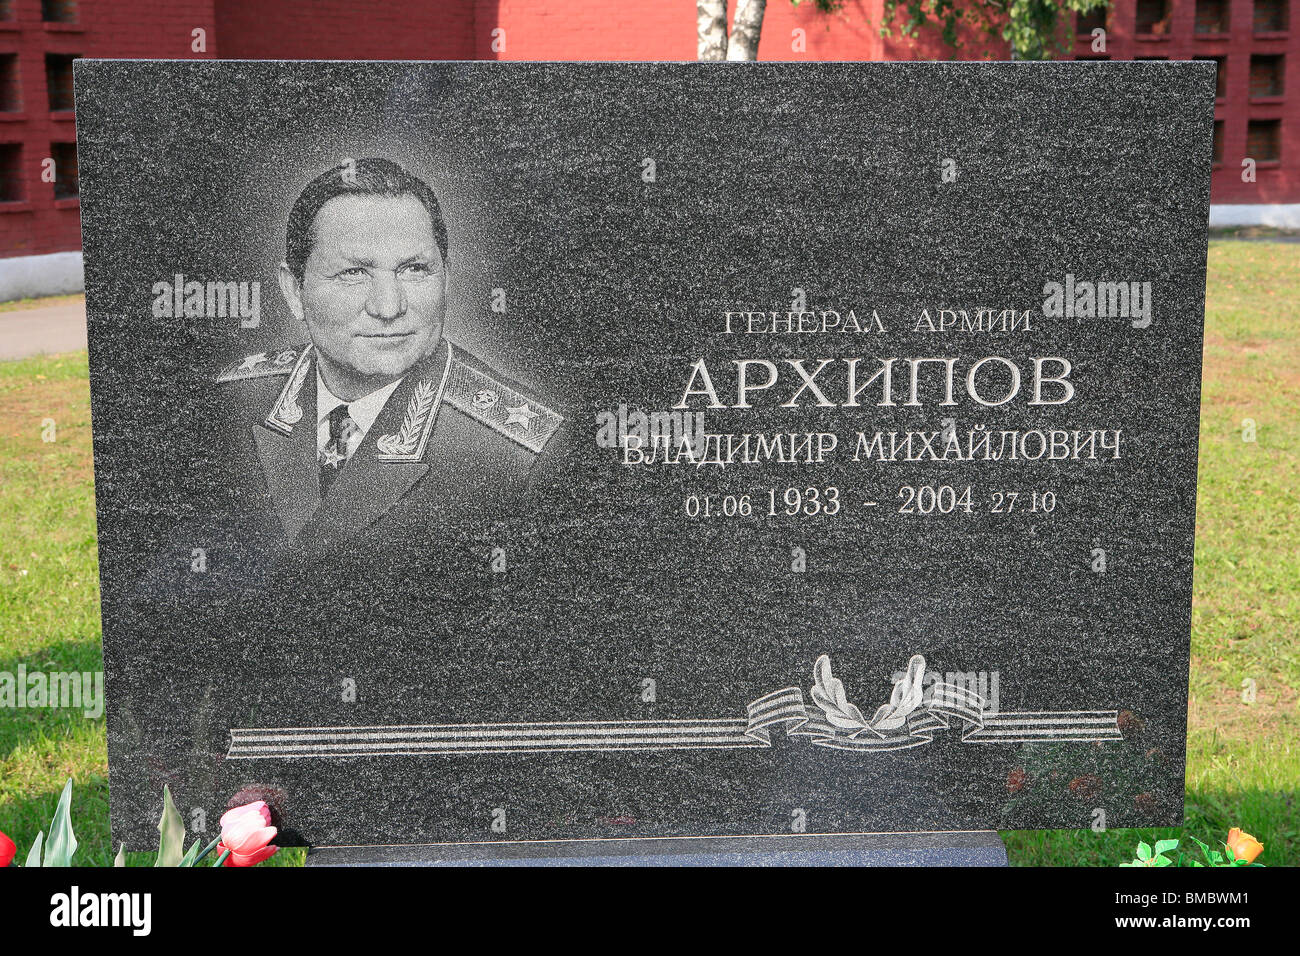 Grave of the Soviet General of the Army Vladimir Mikhailovich Arkhipov (1933-2004) at Novodevichy Cemetery in Moscow, Russia Stock Photo